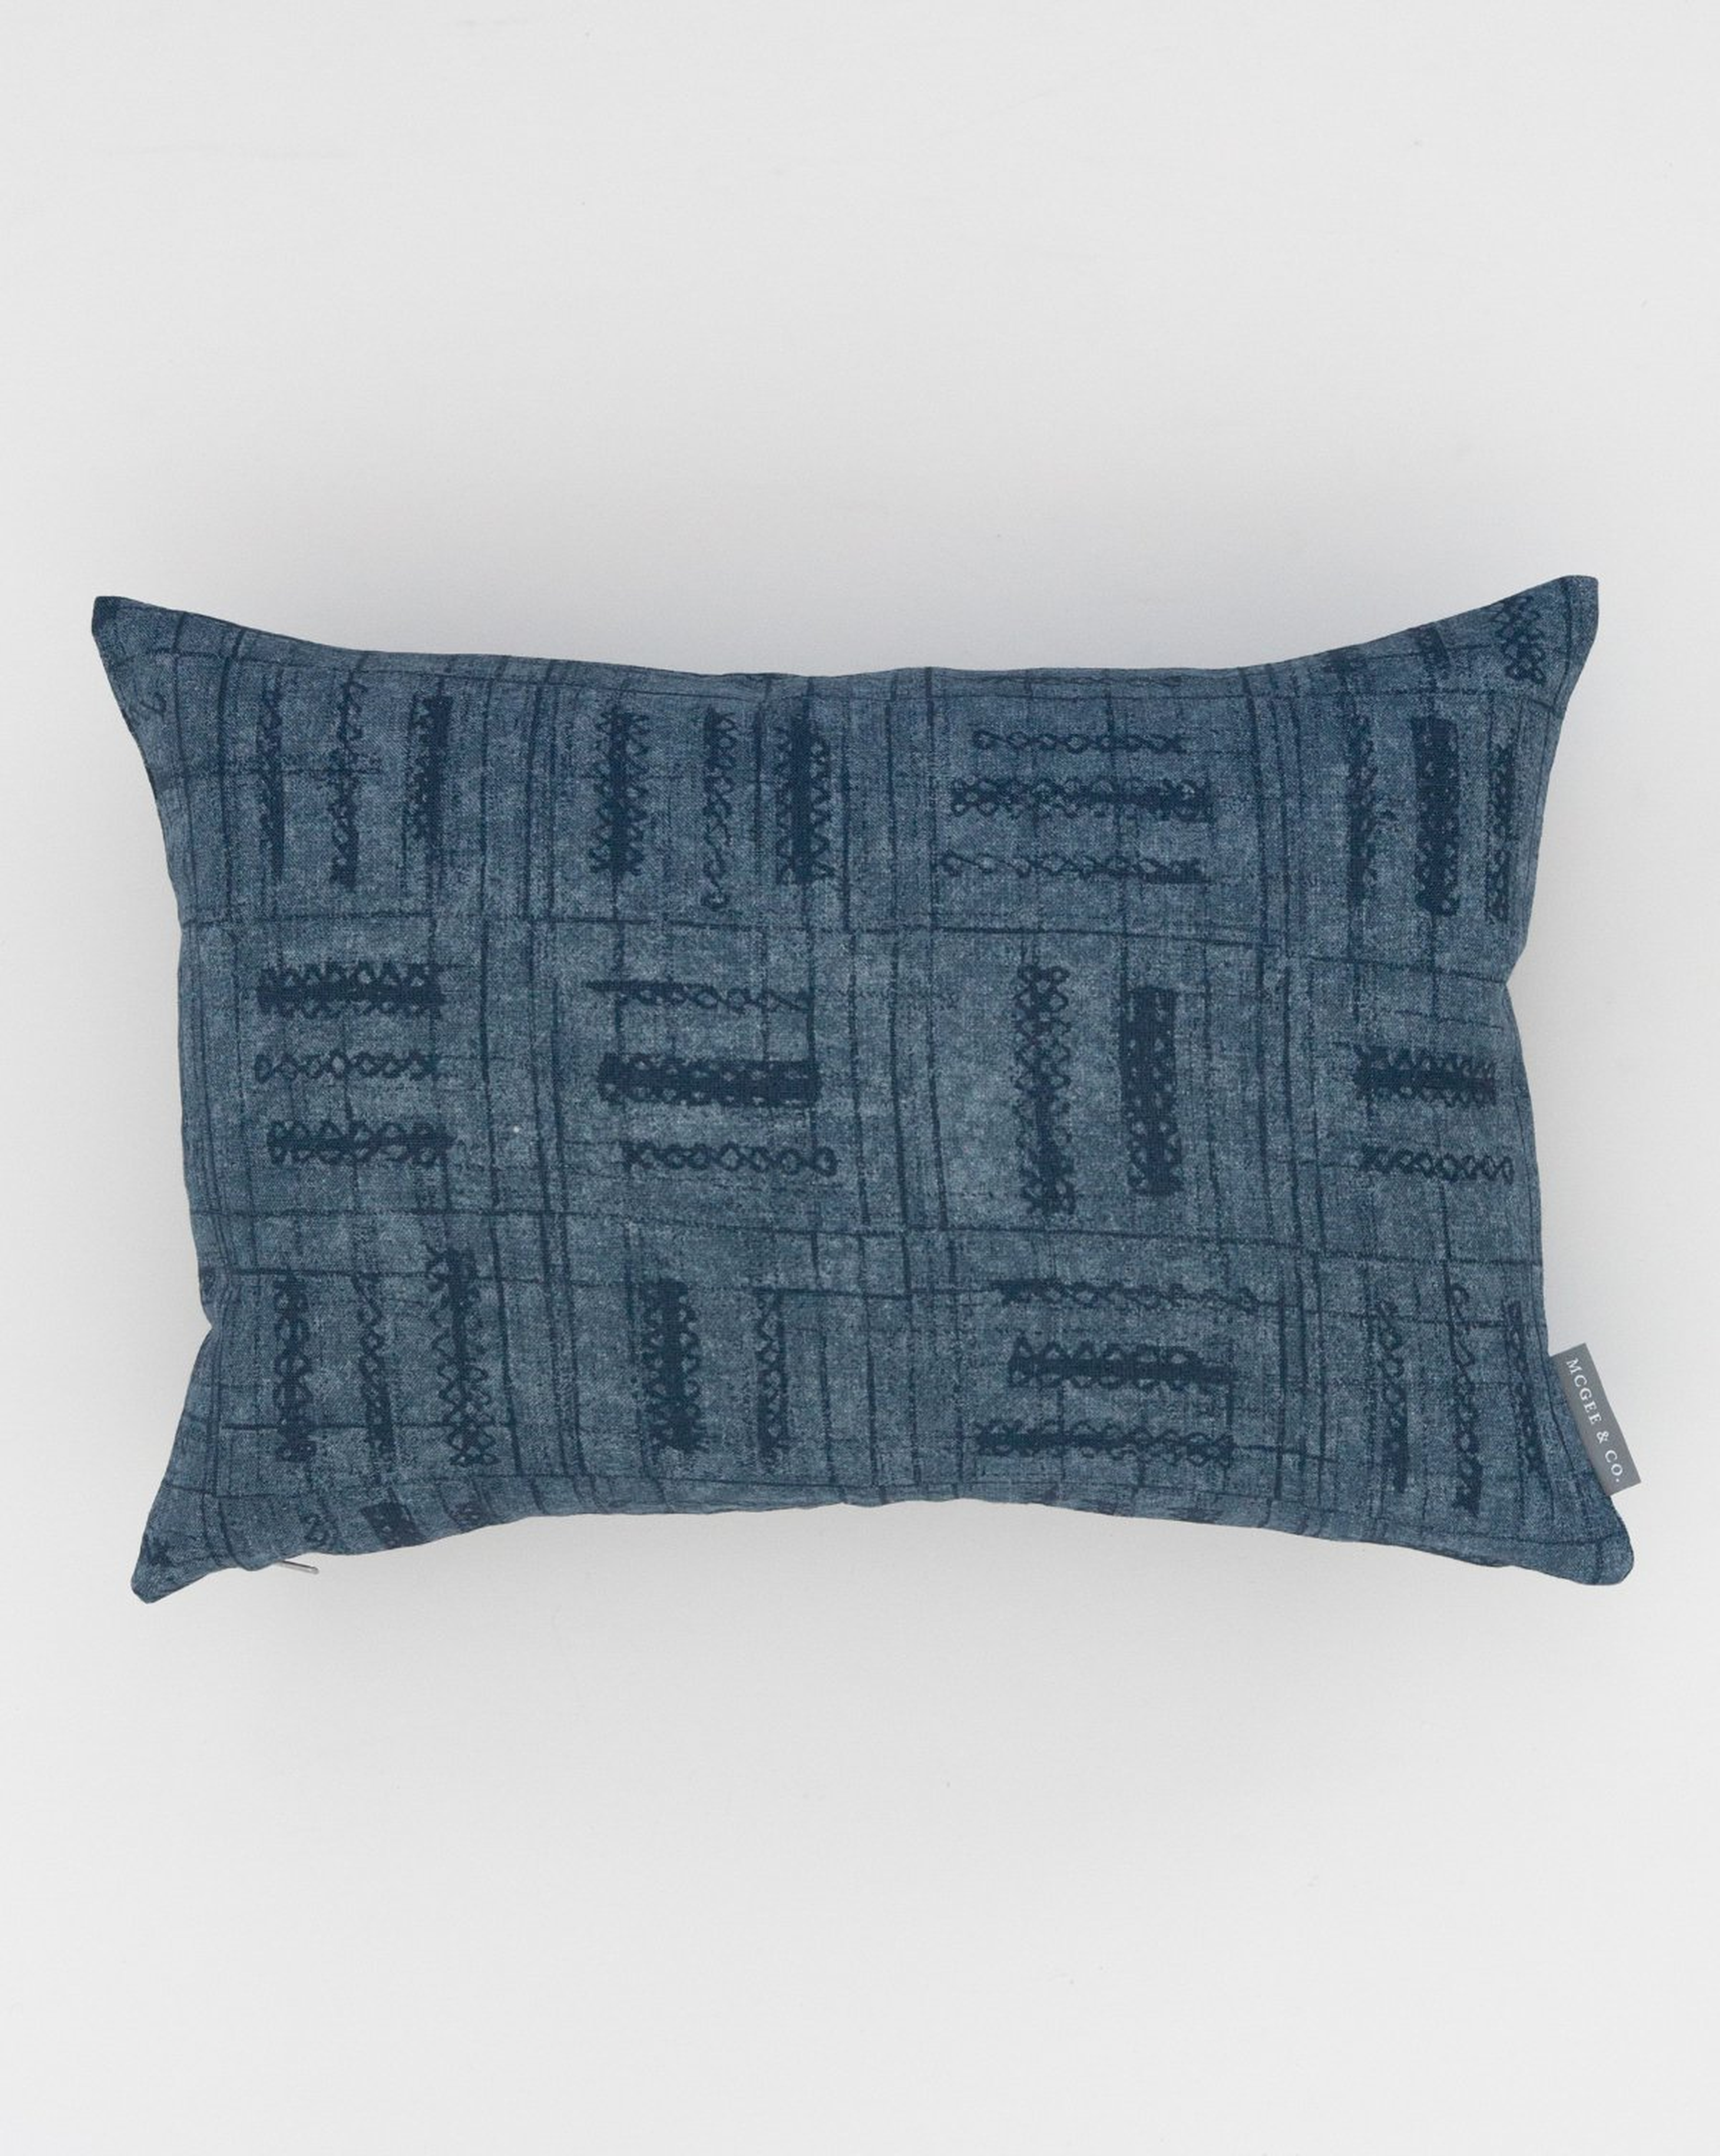 AMORET PILLOW WITHOUT INSERT, 14" x 20" - McGee & Co.